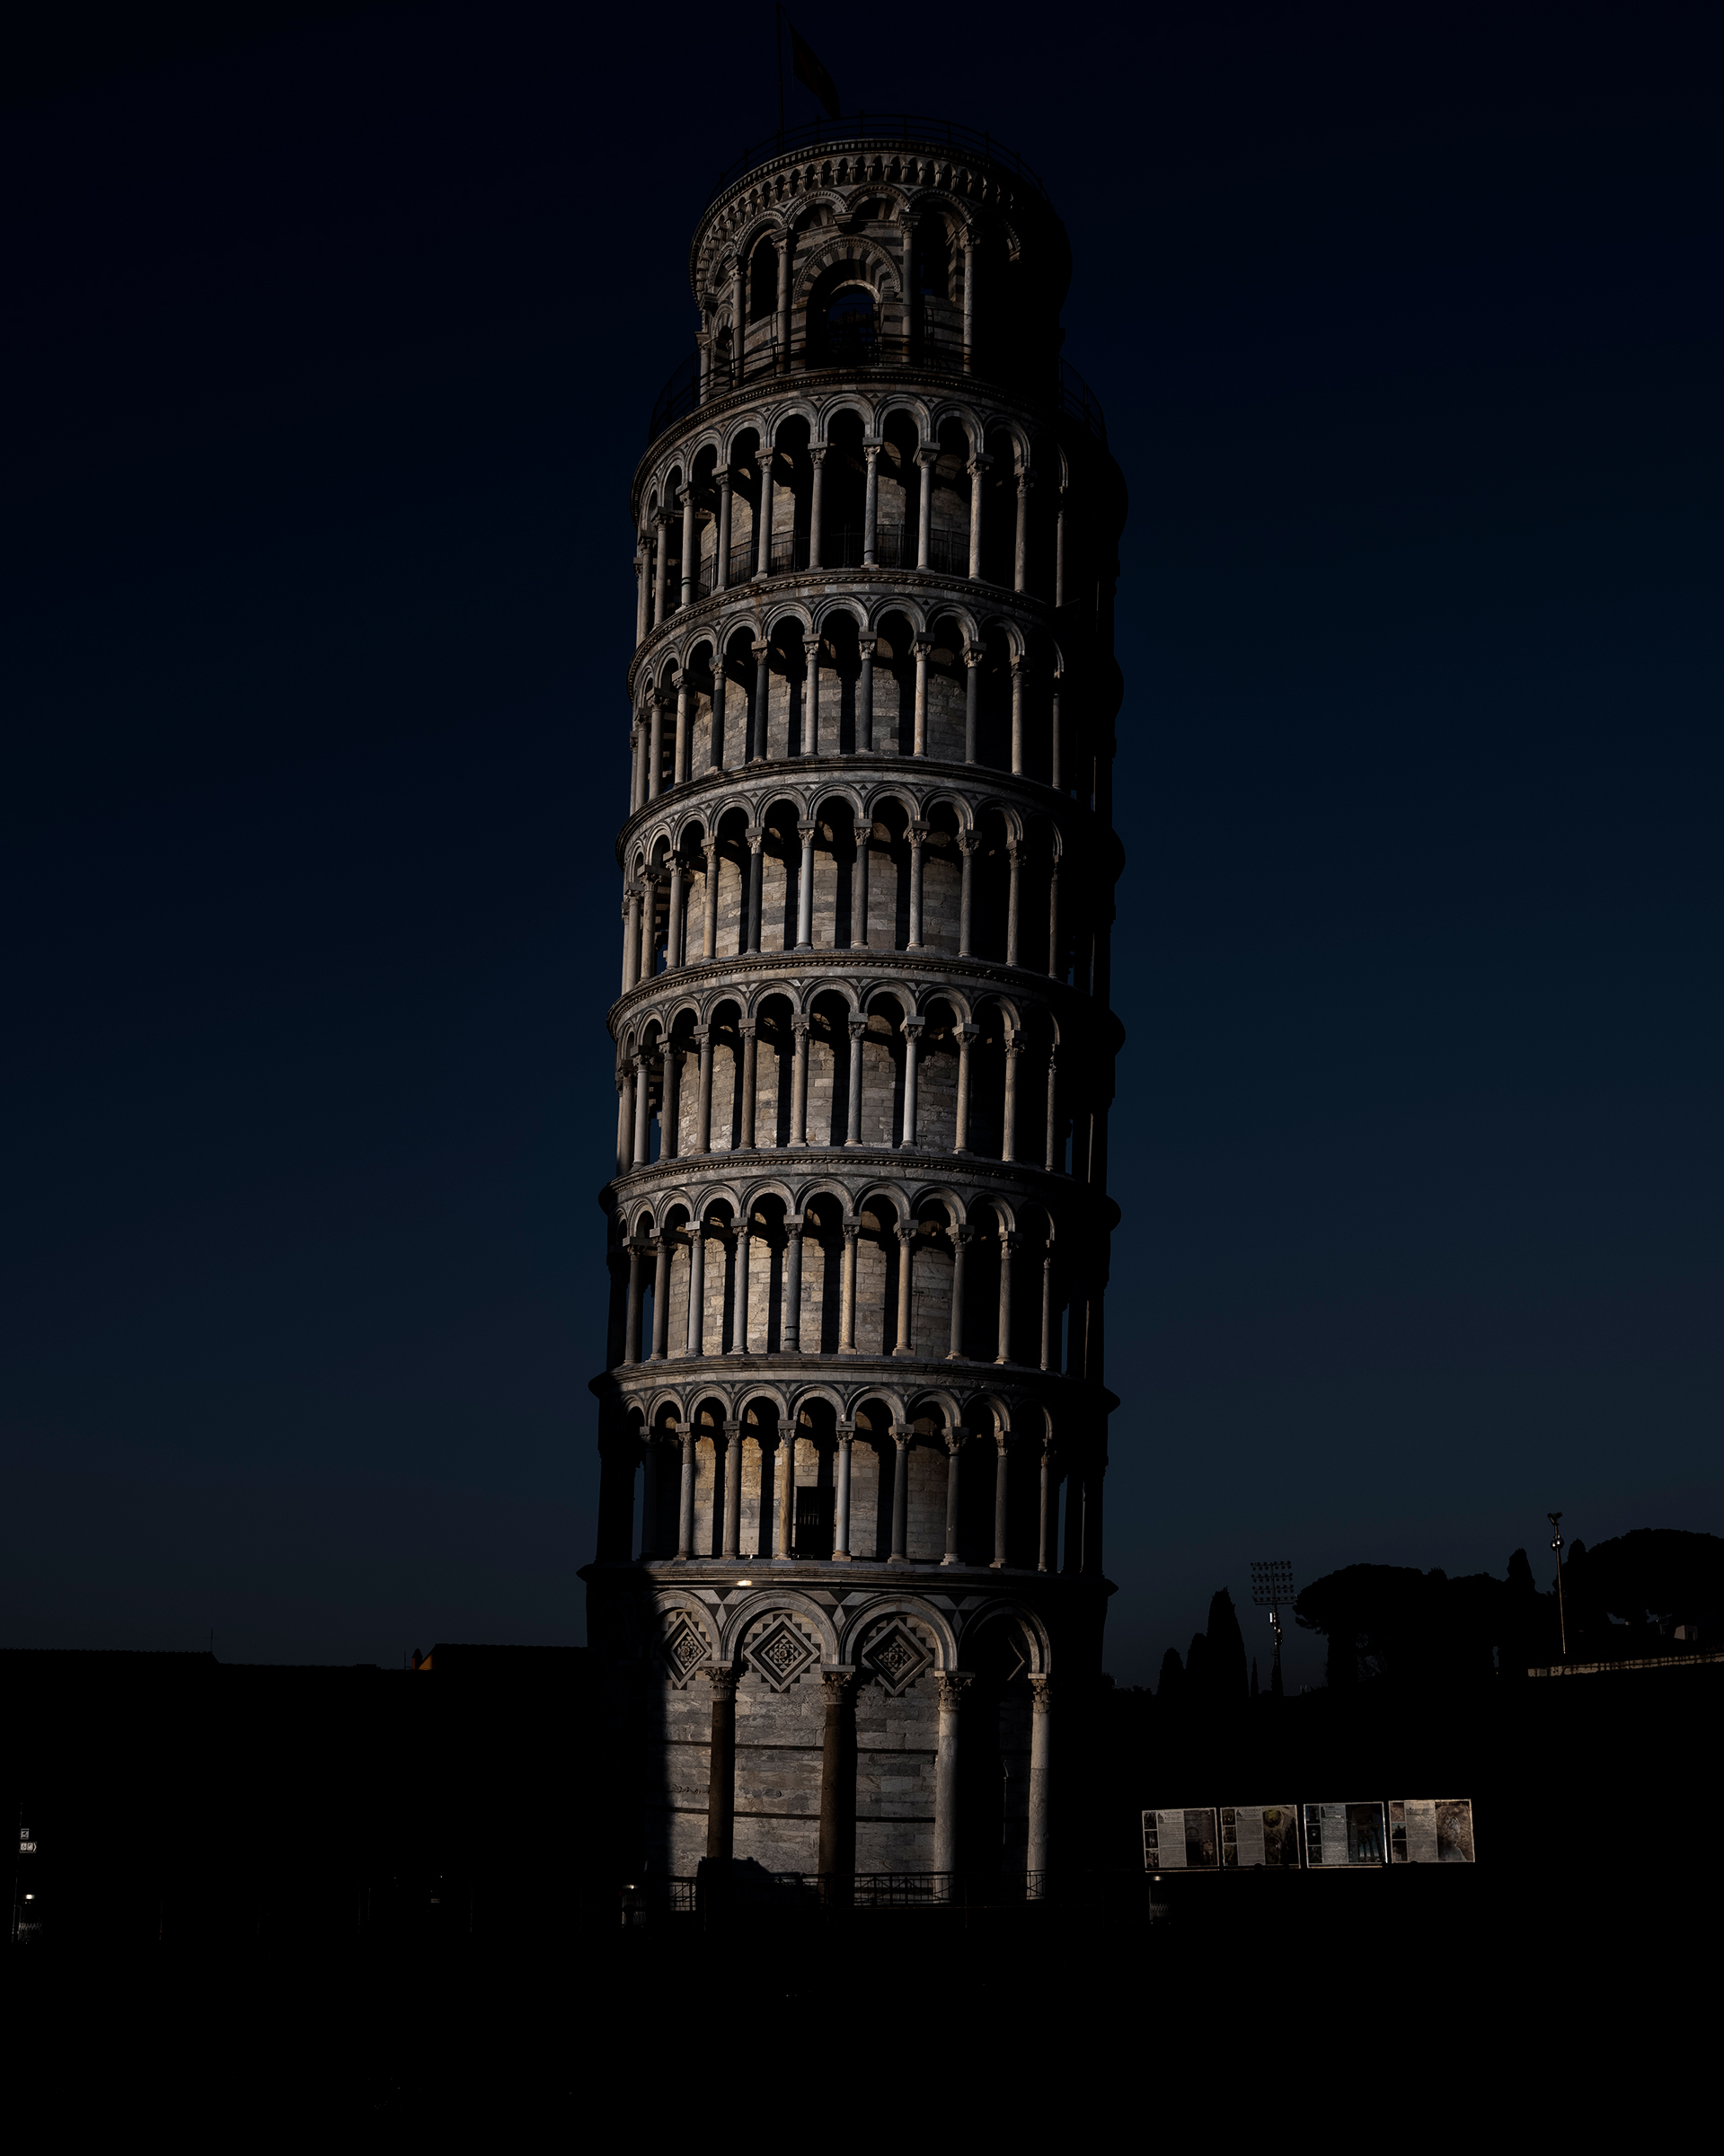 The Tower of Pisa in March. All tourist attractions remain closed across Italy due to the pandemic.